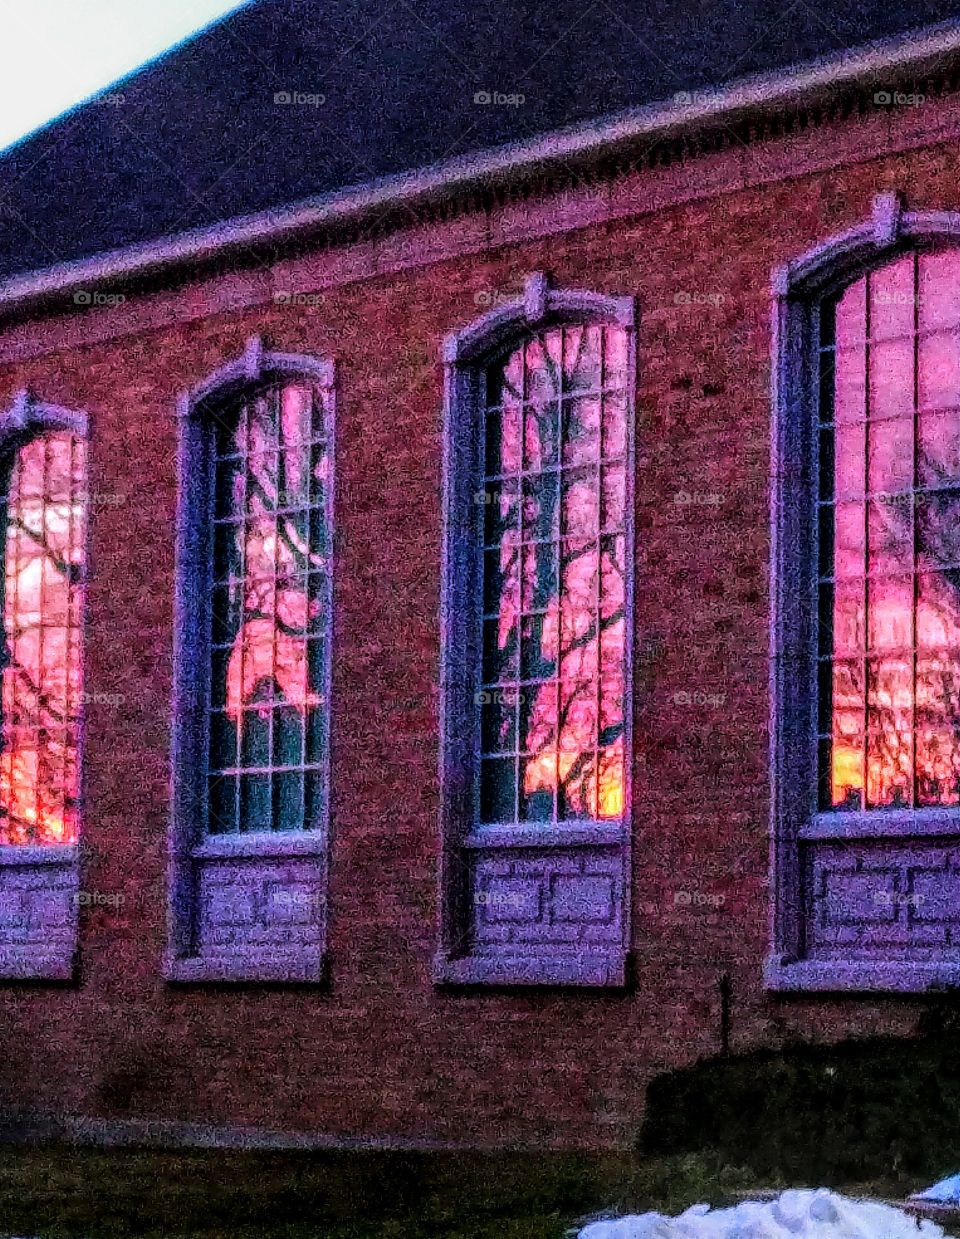 reflection of sunset in windows